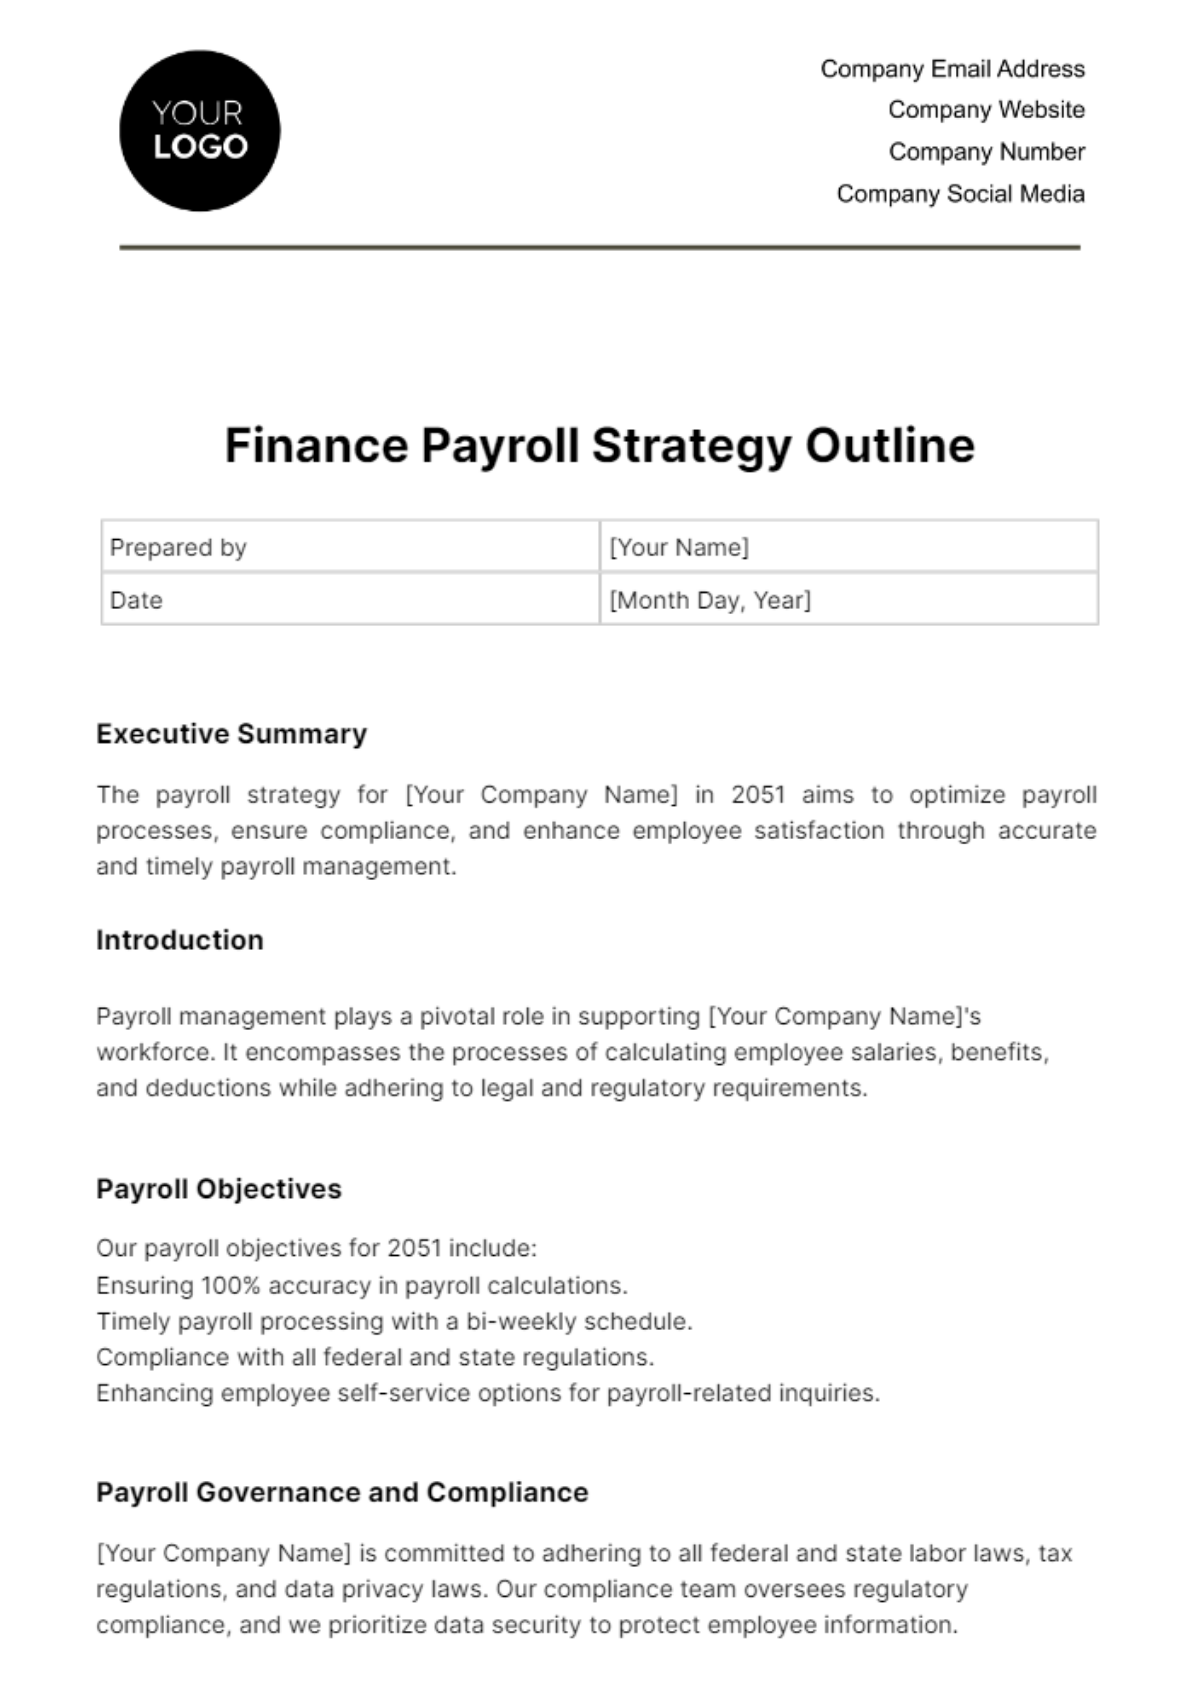 Finance Payroll Strategy Outline Template